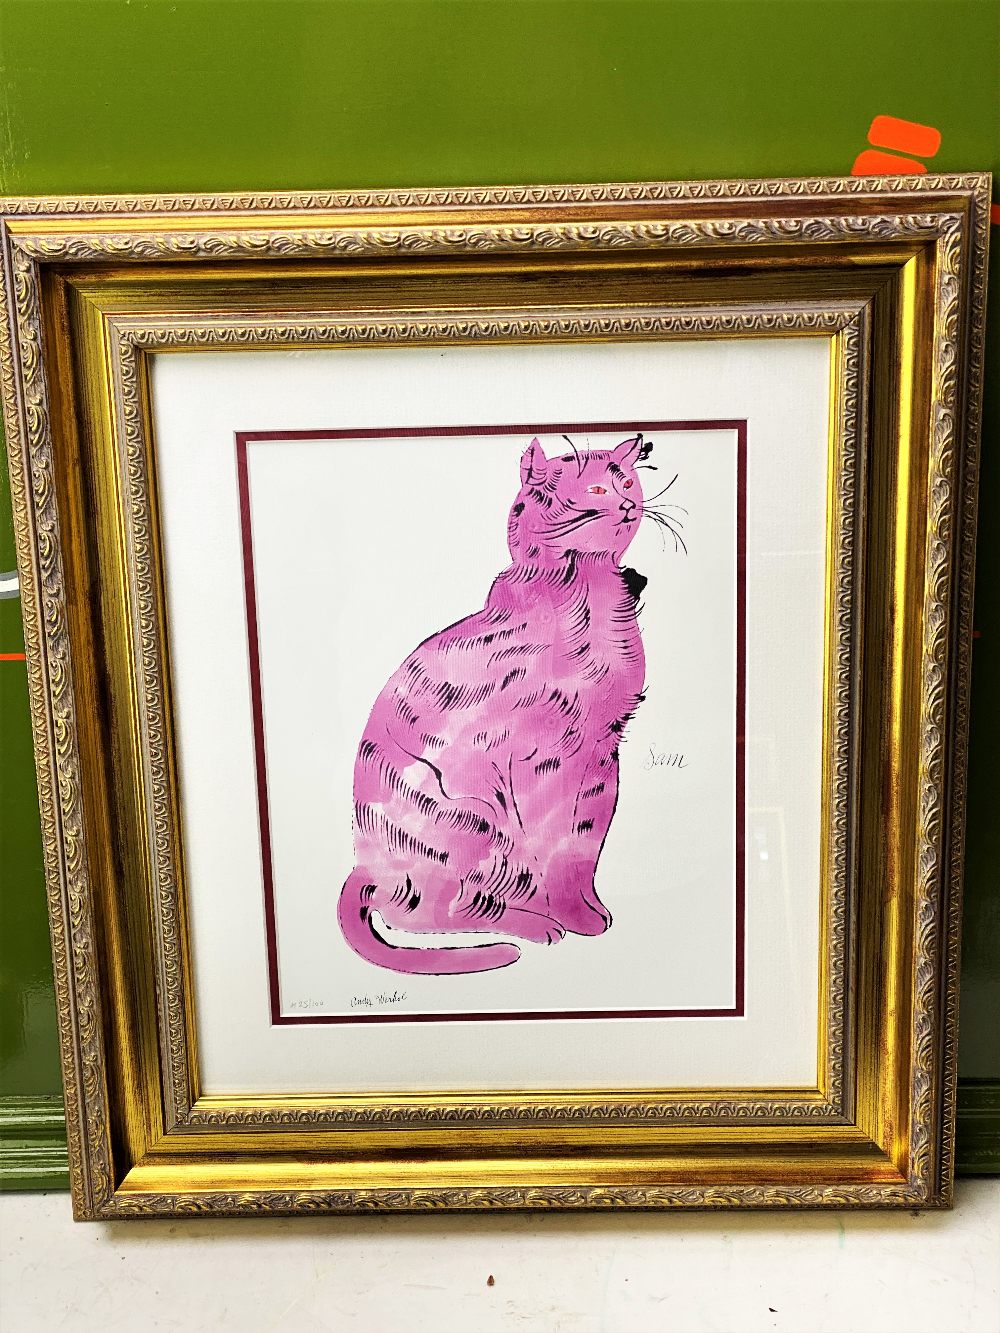 Andy Warhol "Pink Sam" 1954 Plate Signed Lithograph Print/Framed - Image 5 of 5